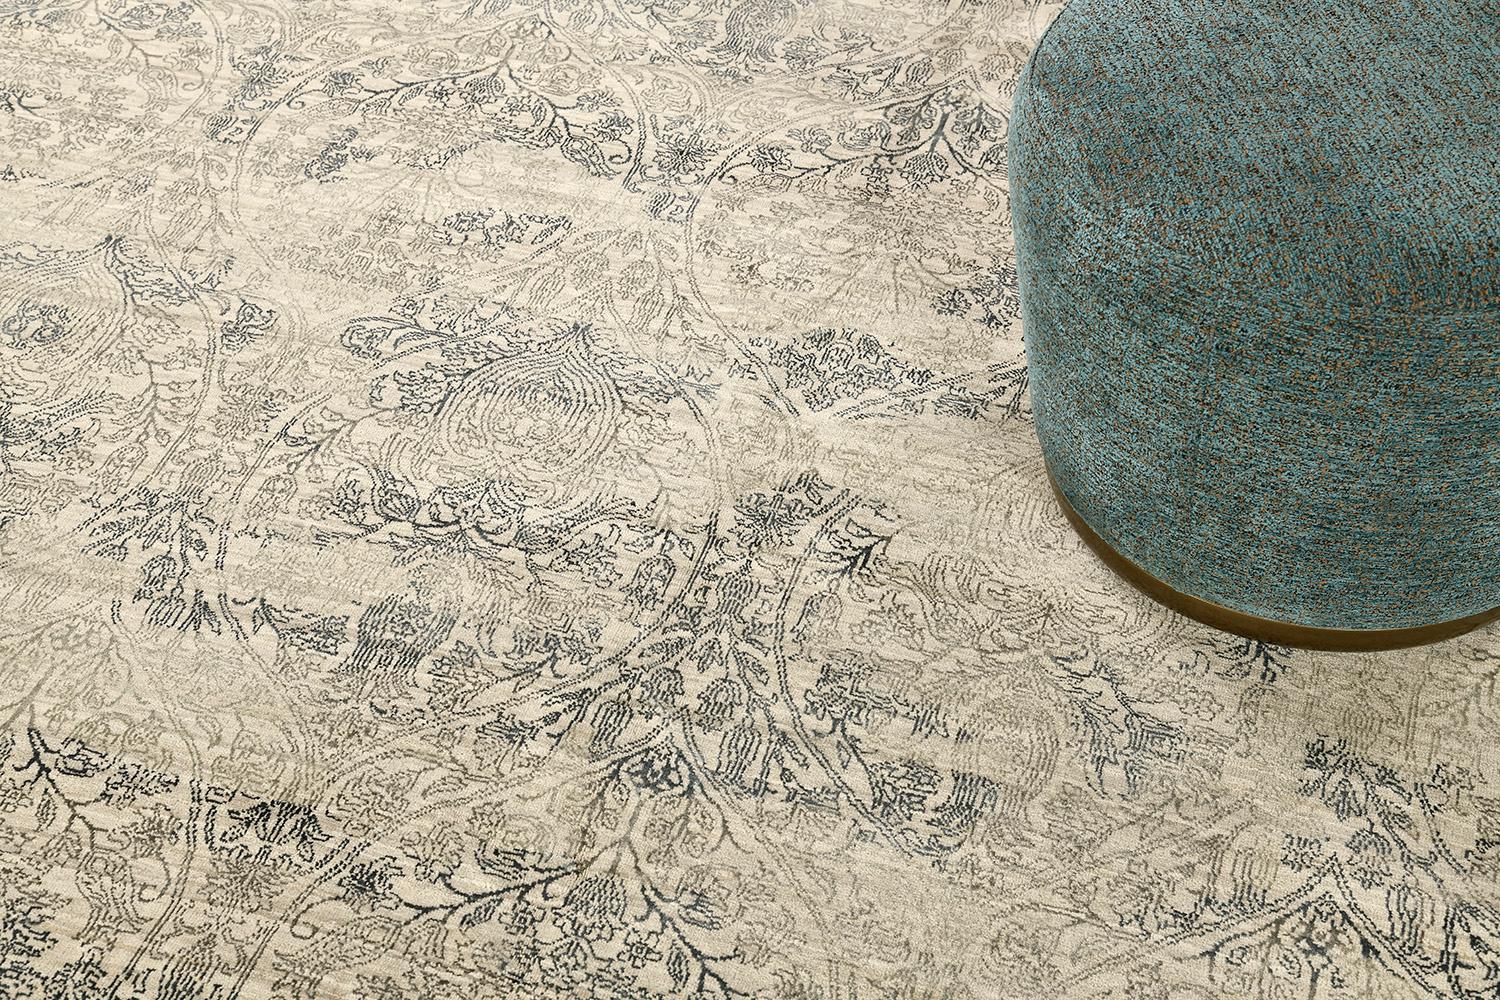 This unique transitional design from the Allure collection is the epitome of elegance and refinement. A wool pile weave that intricately weaves over a silver ground with grey and teal silk detailing that brings classical floral motifs into